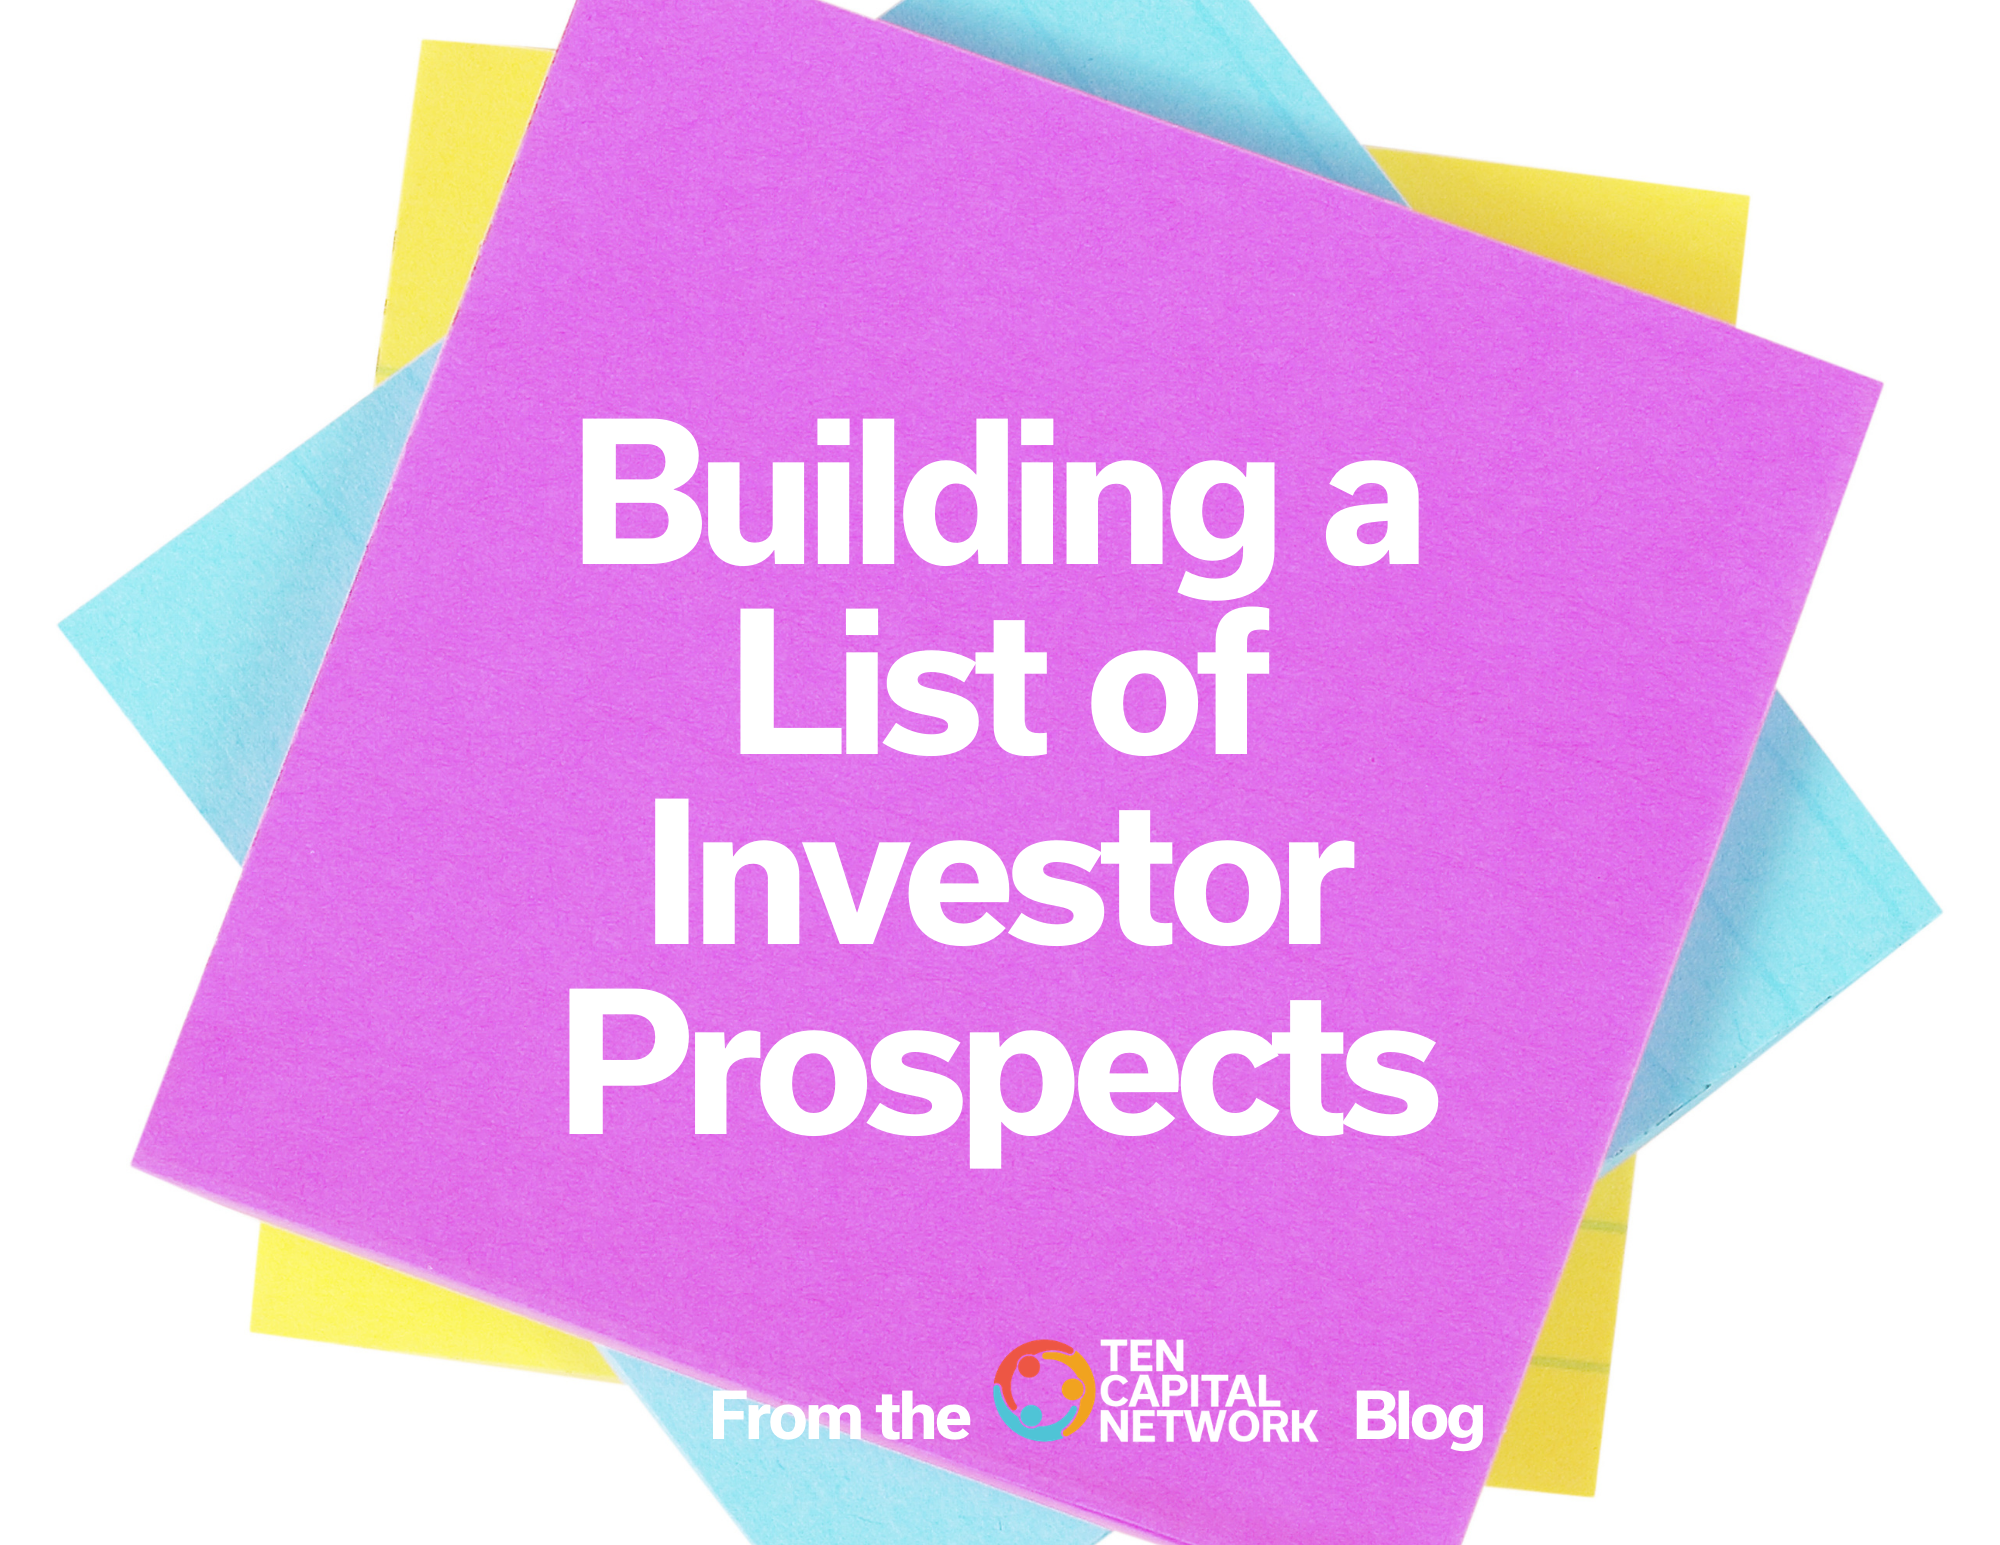 Building a List of Investor Prospects